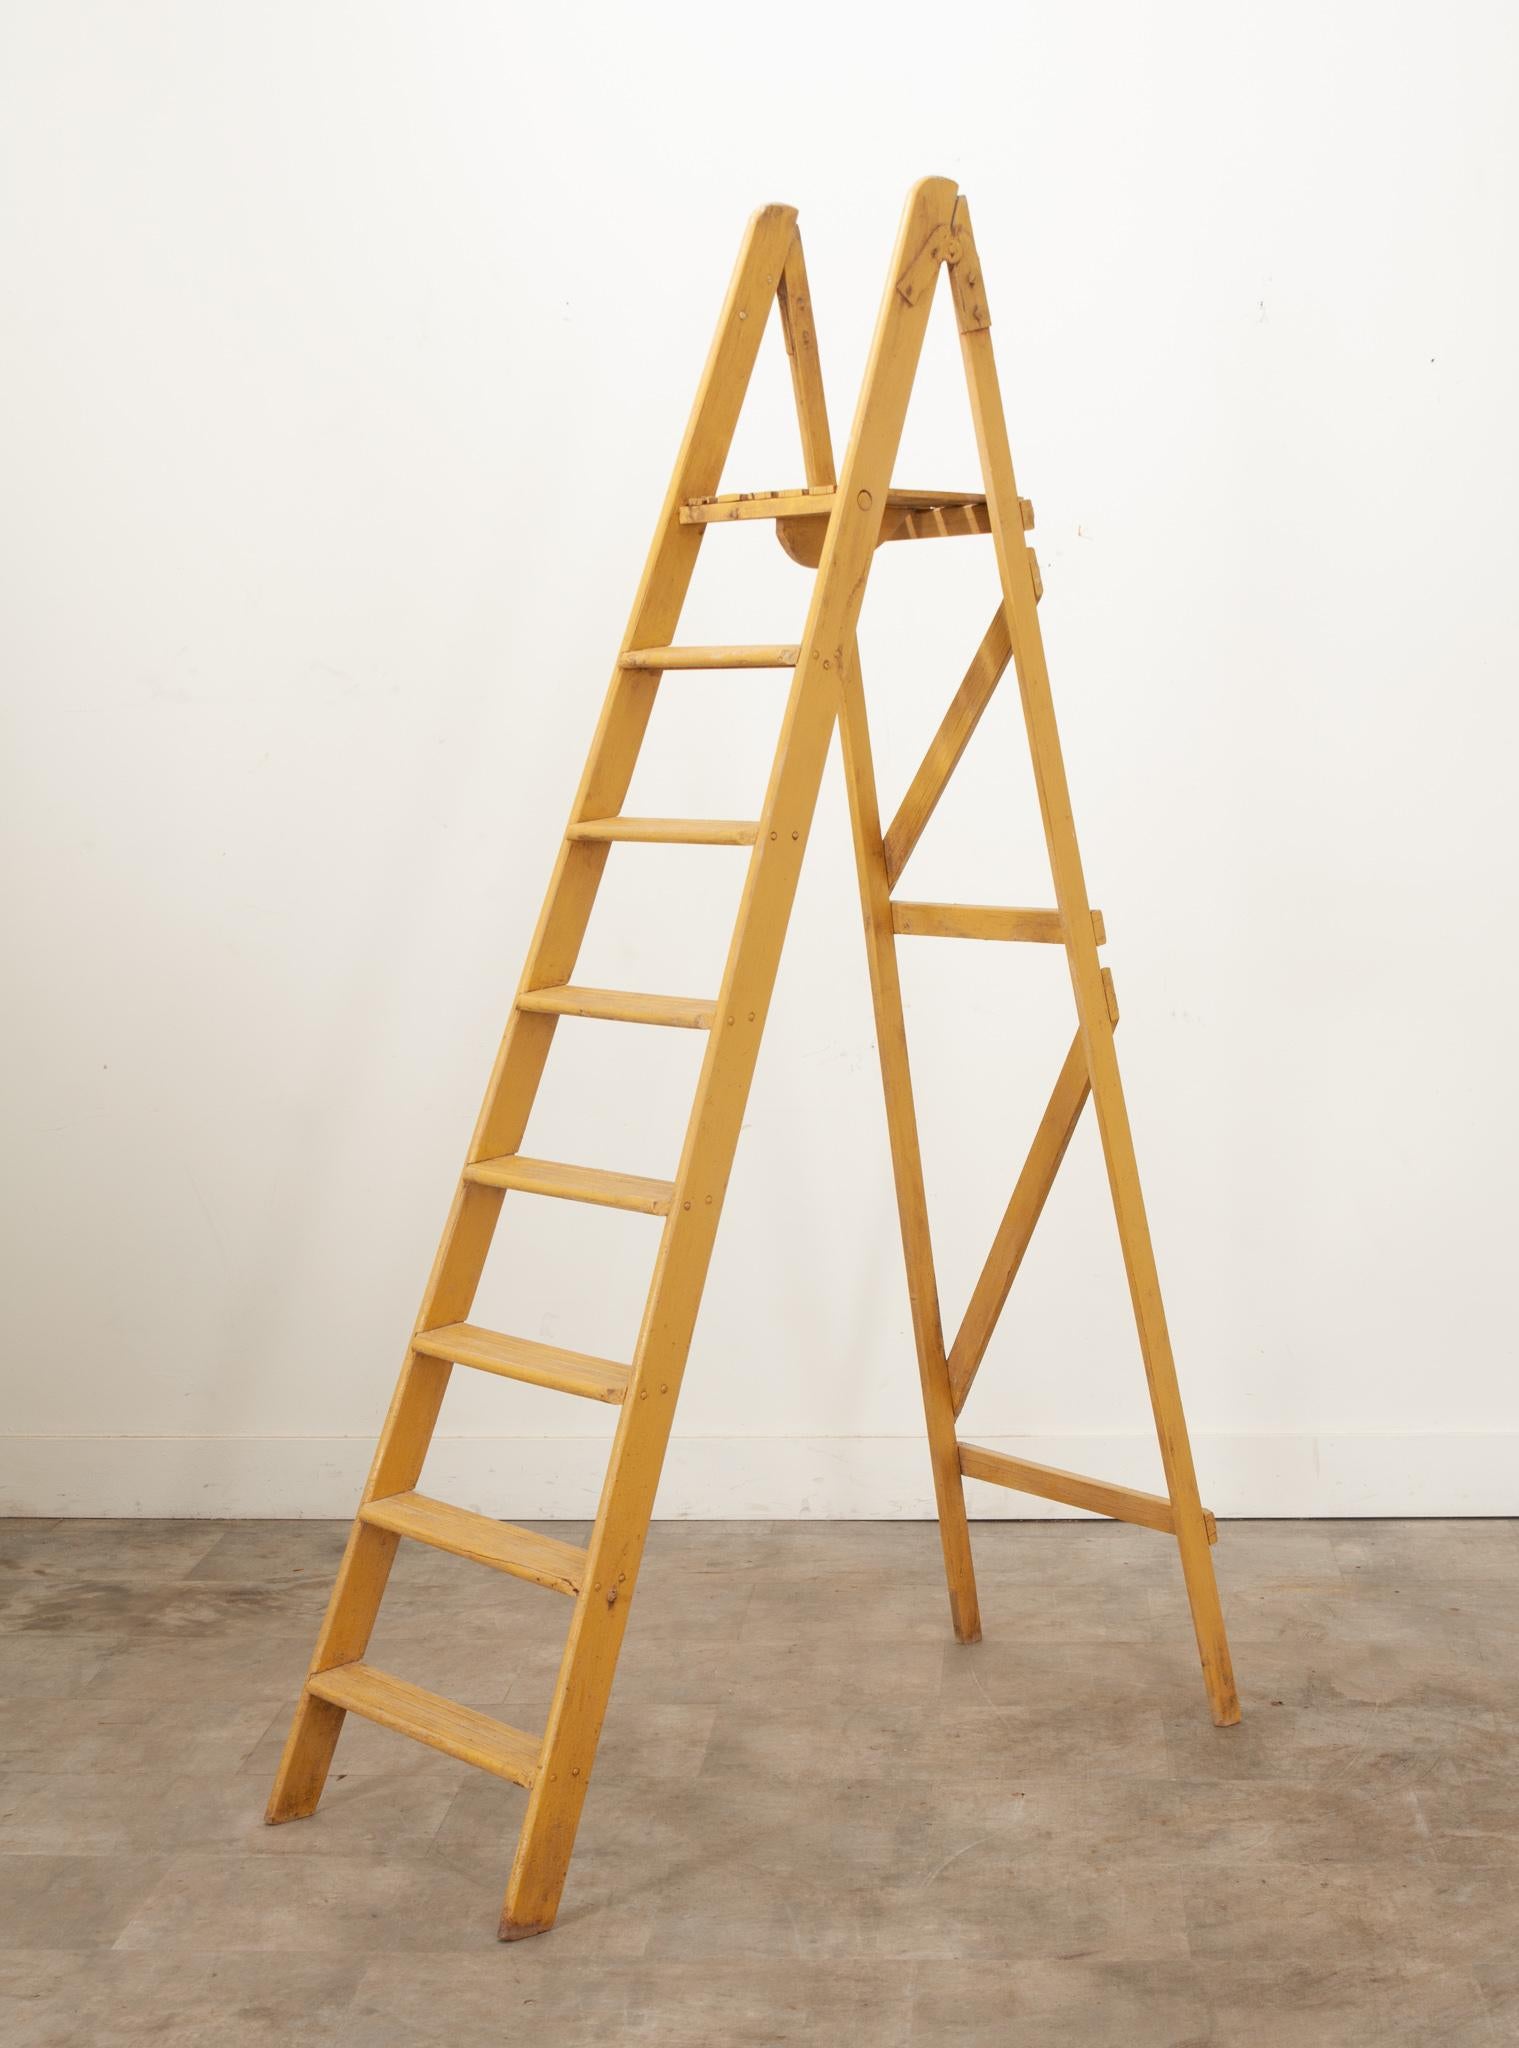 A French folding ladder, perfect for display or unique shelving. Painted yellow, this ladder is fitted with seven rungs, a slatted top platform for additional accessibility, and hinges that allow it to be folded and stored flat. This piece is not